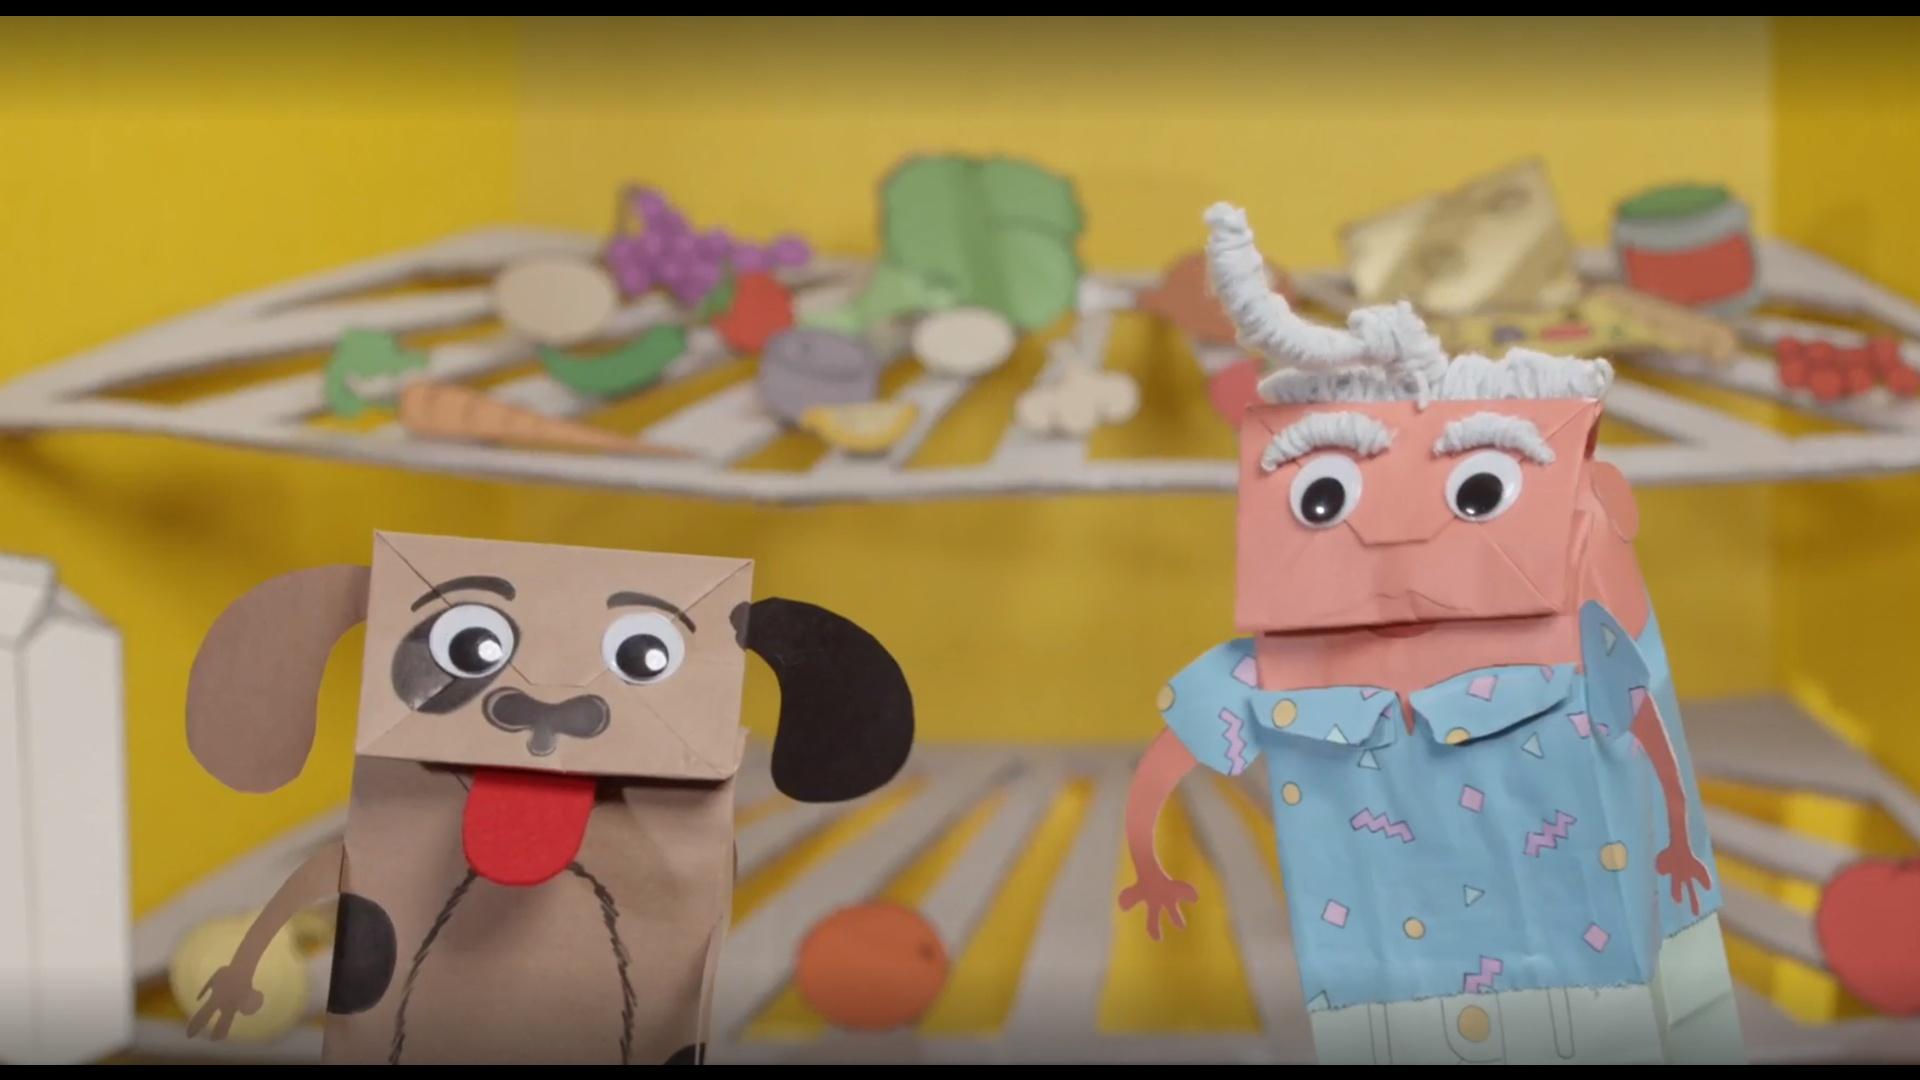 Paper bag puppets of a boy and a dog stand in front of an open refrigerator.